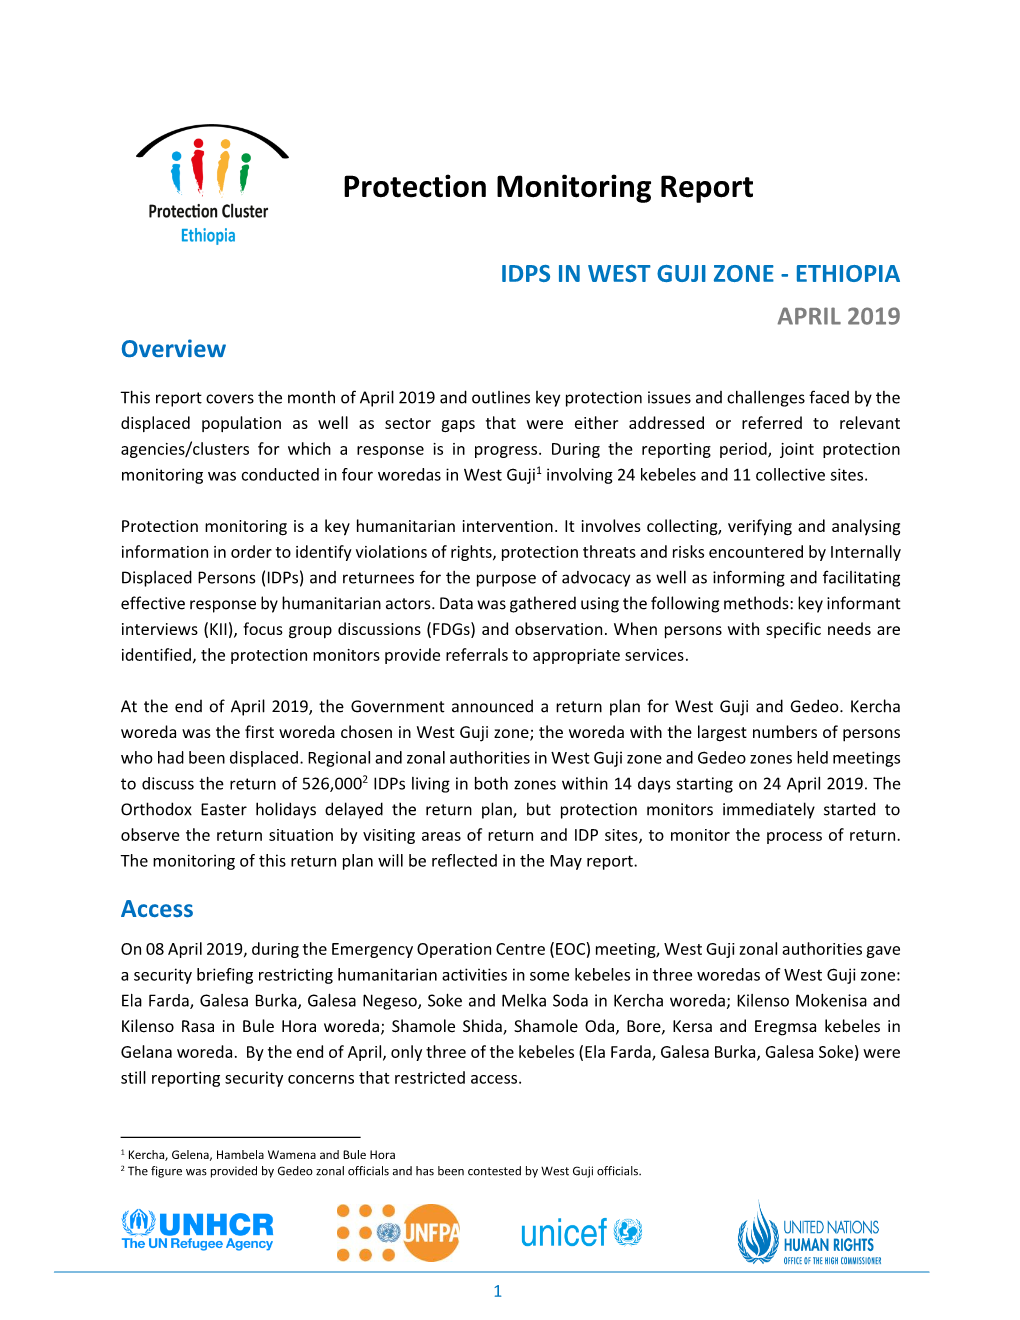 Joint UN IDP Protection Monitoring Report